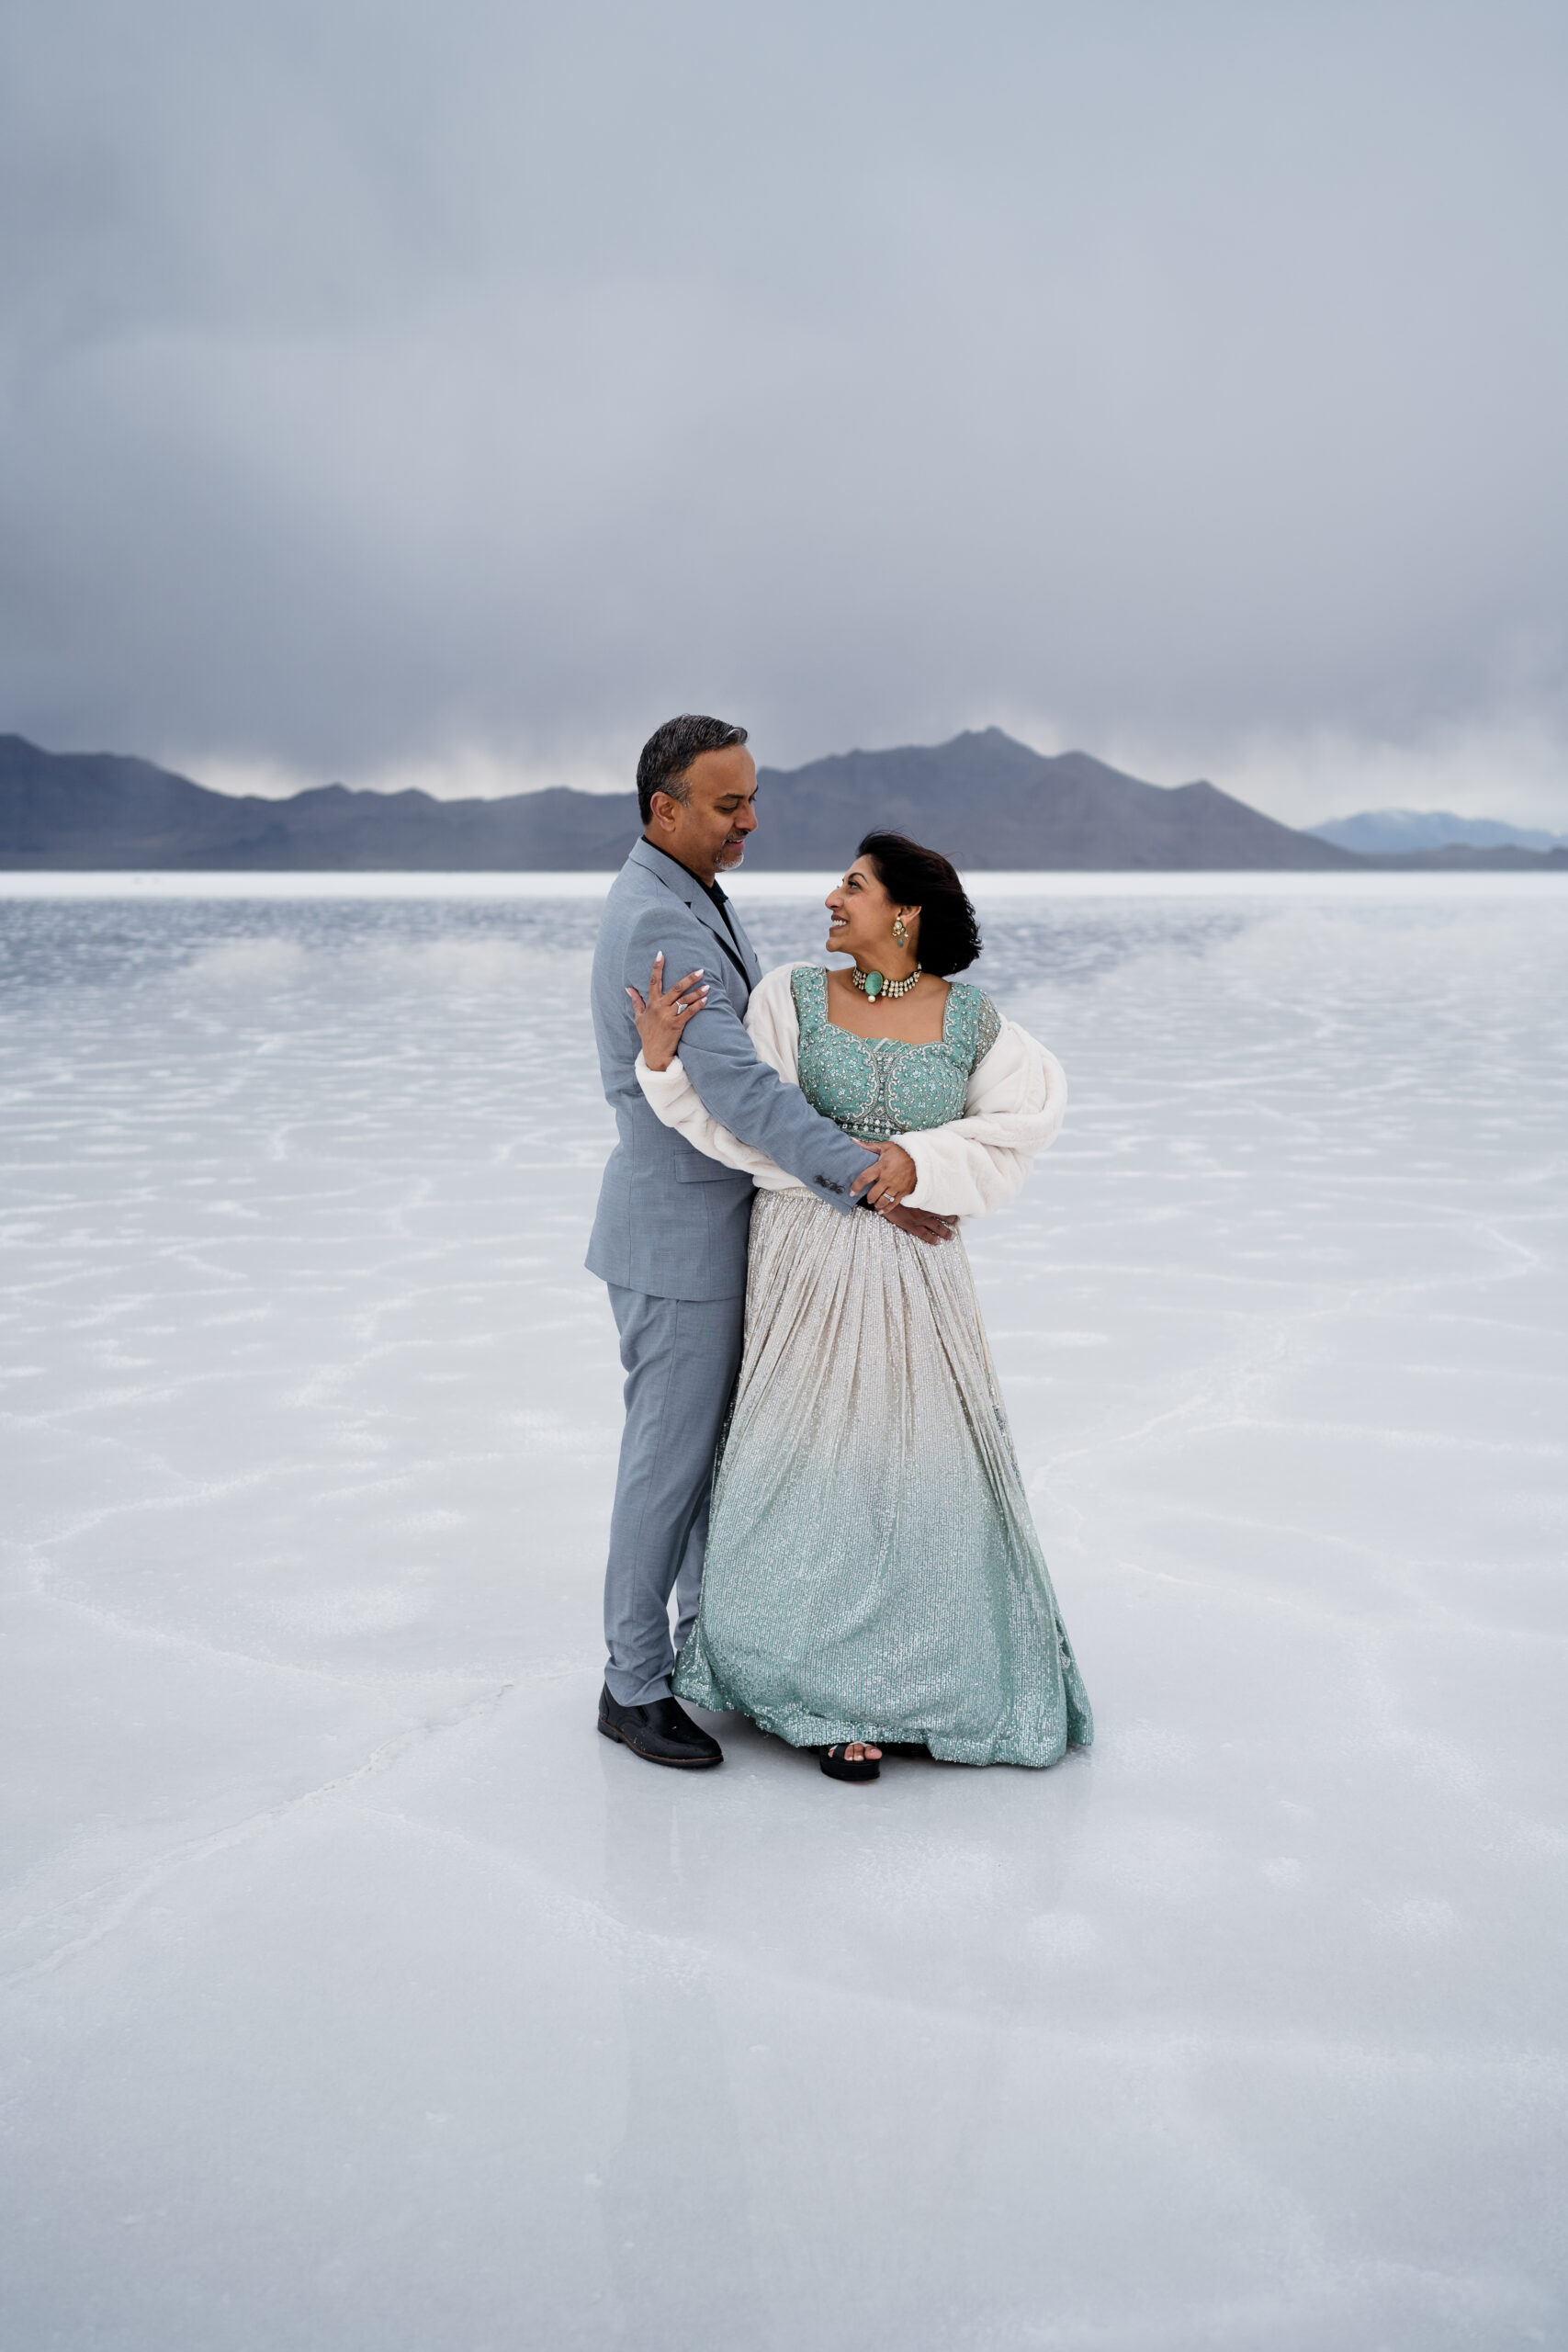 Rare flooded bonneville salt flats couple holding each other in formal attire